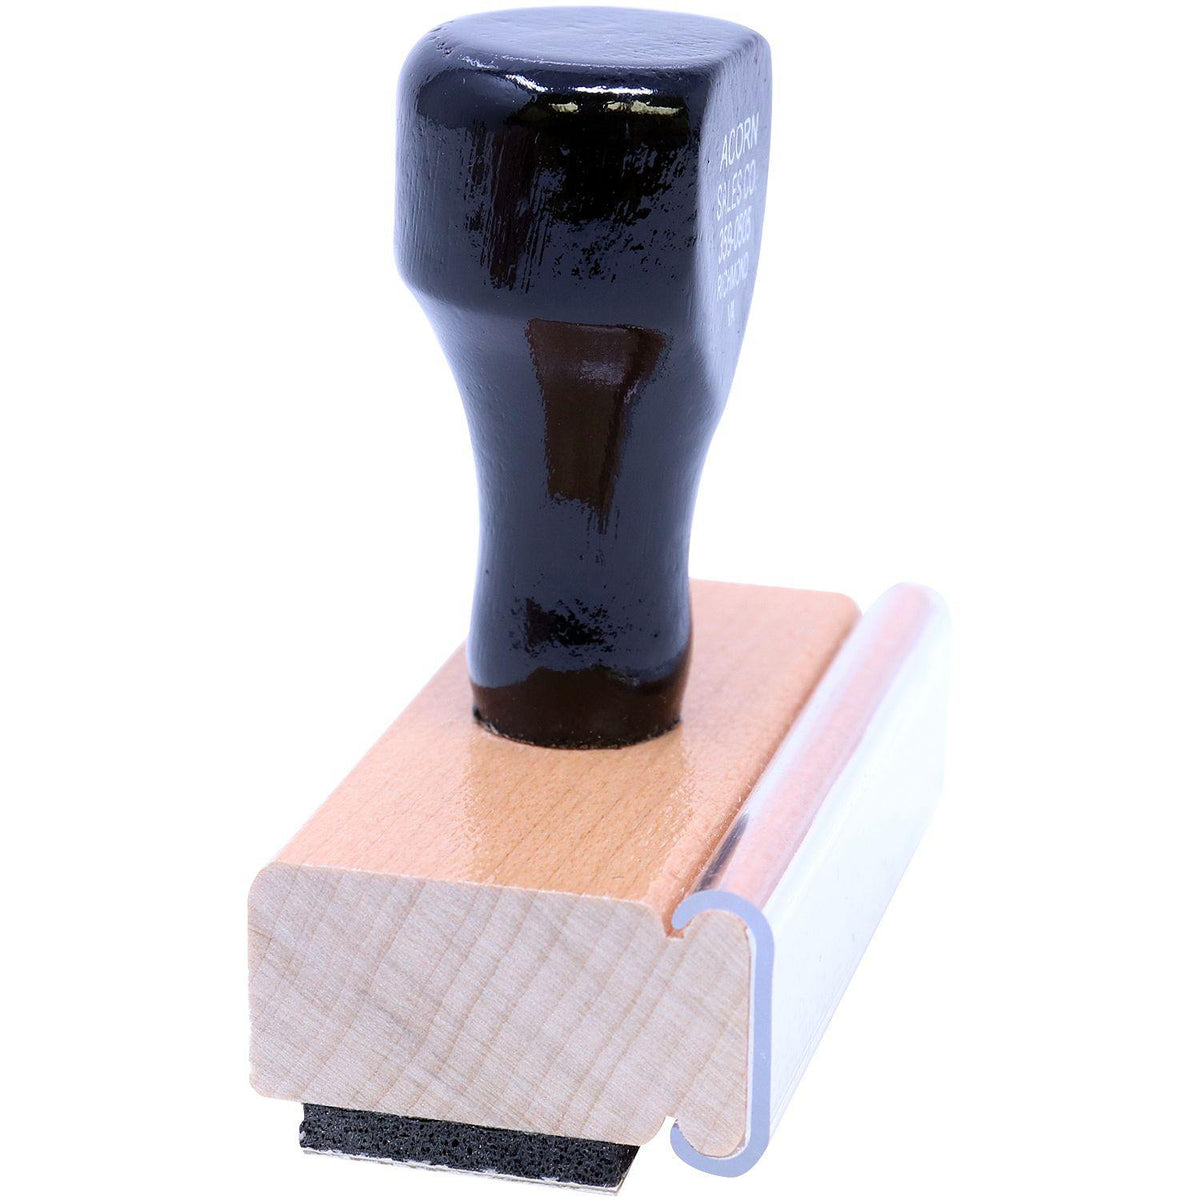 Side View of Large Amazing Rubber Stamp at an Angle